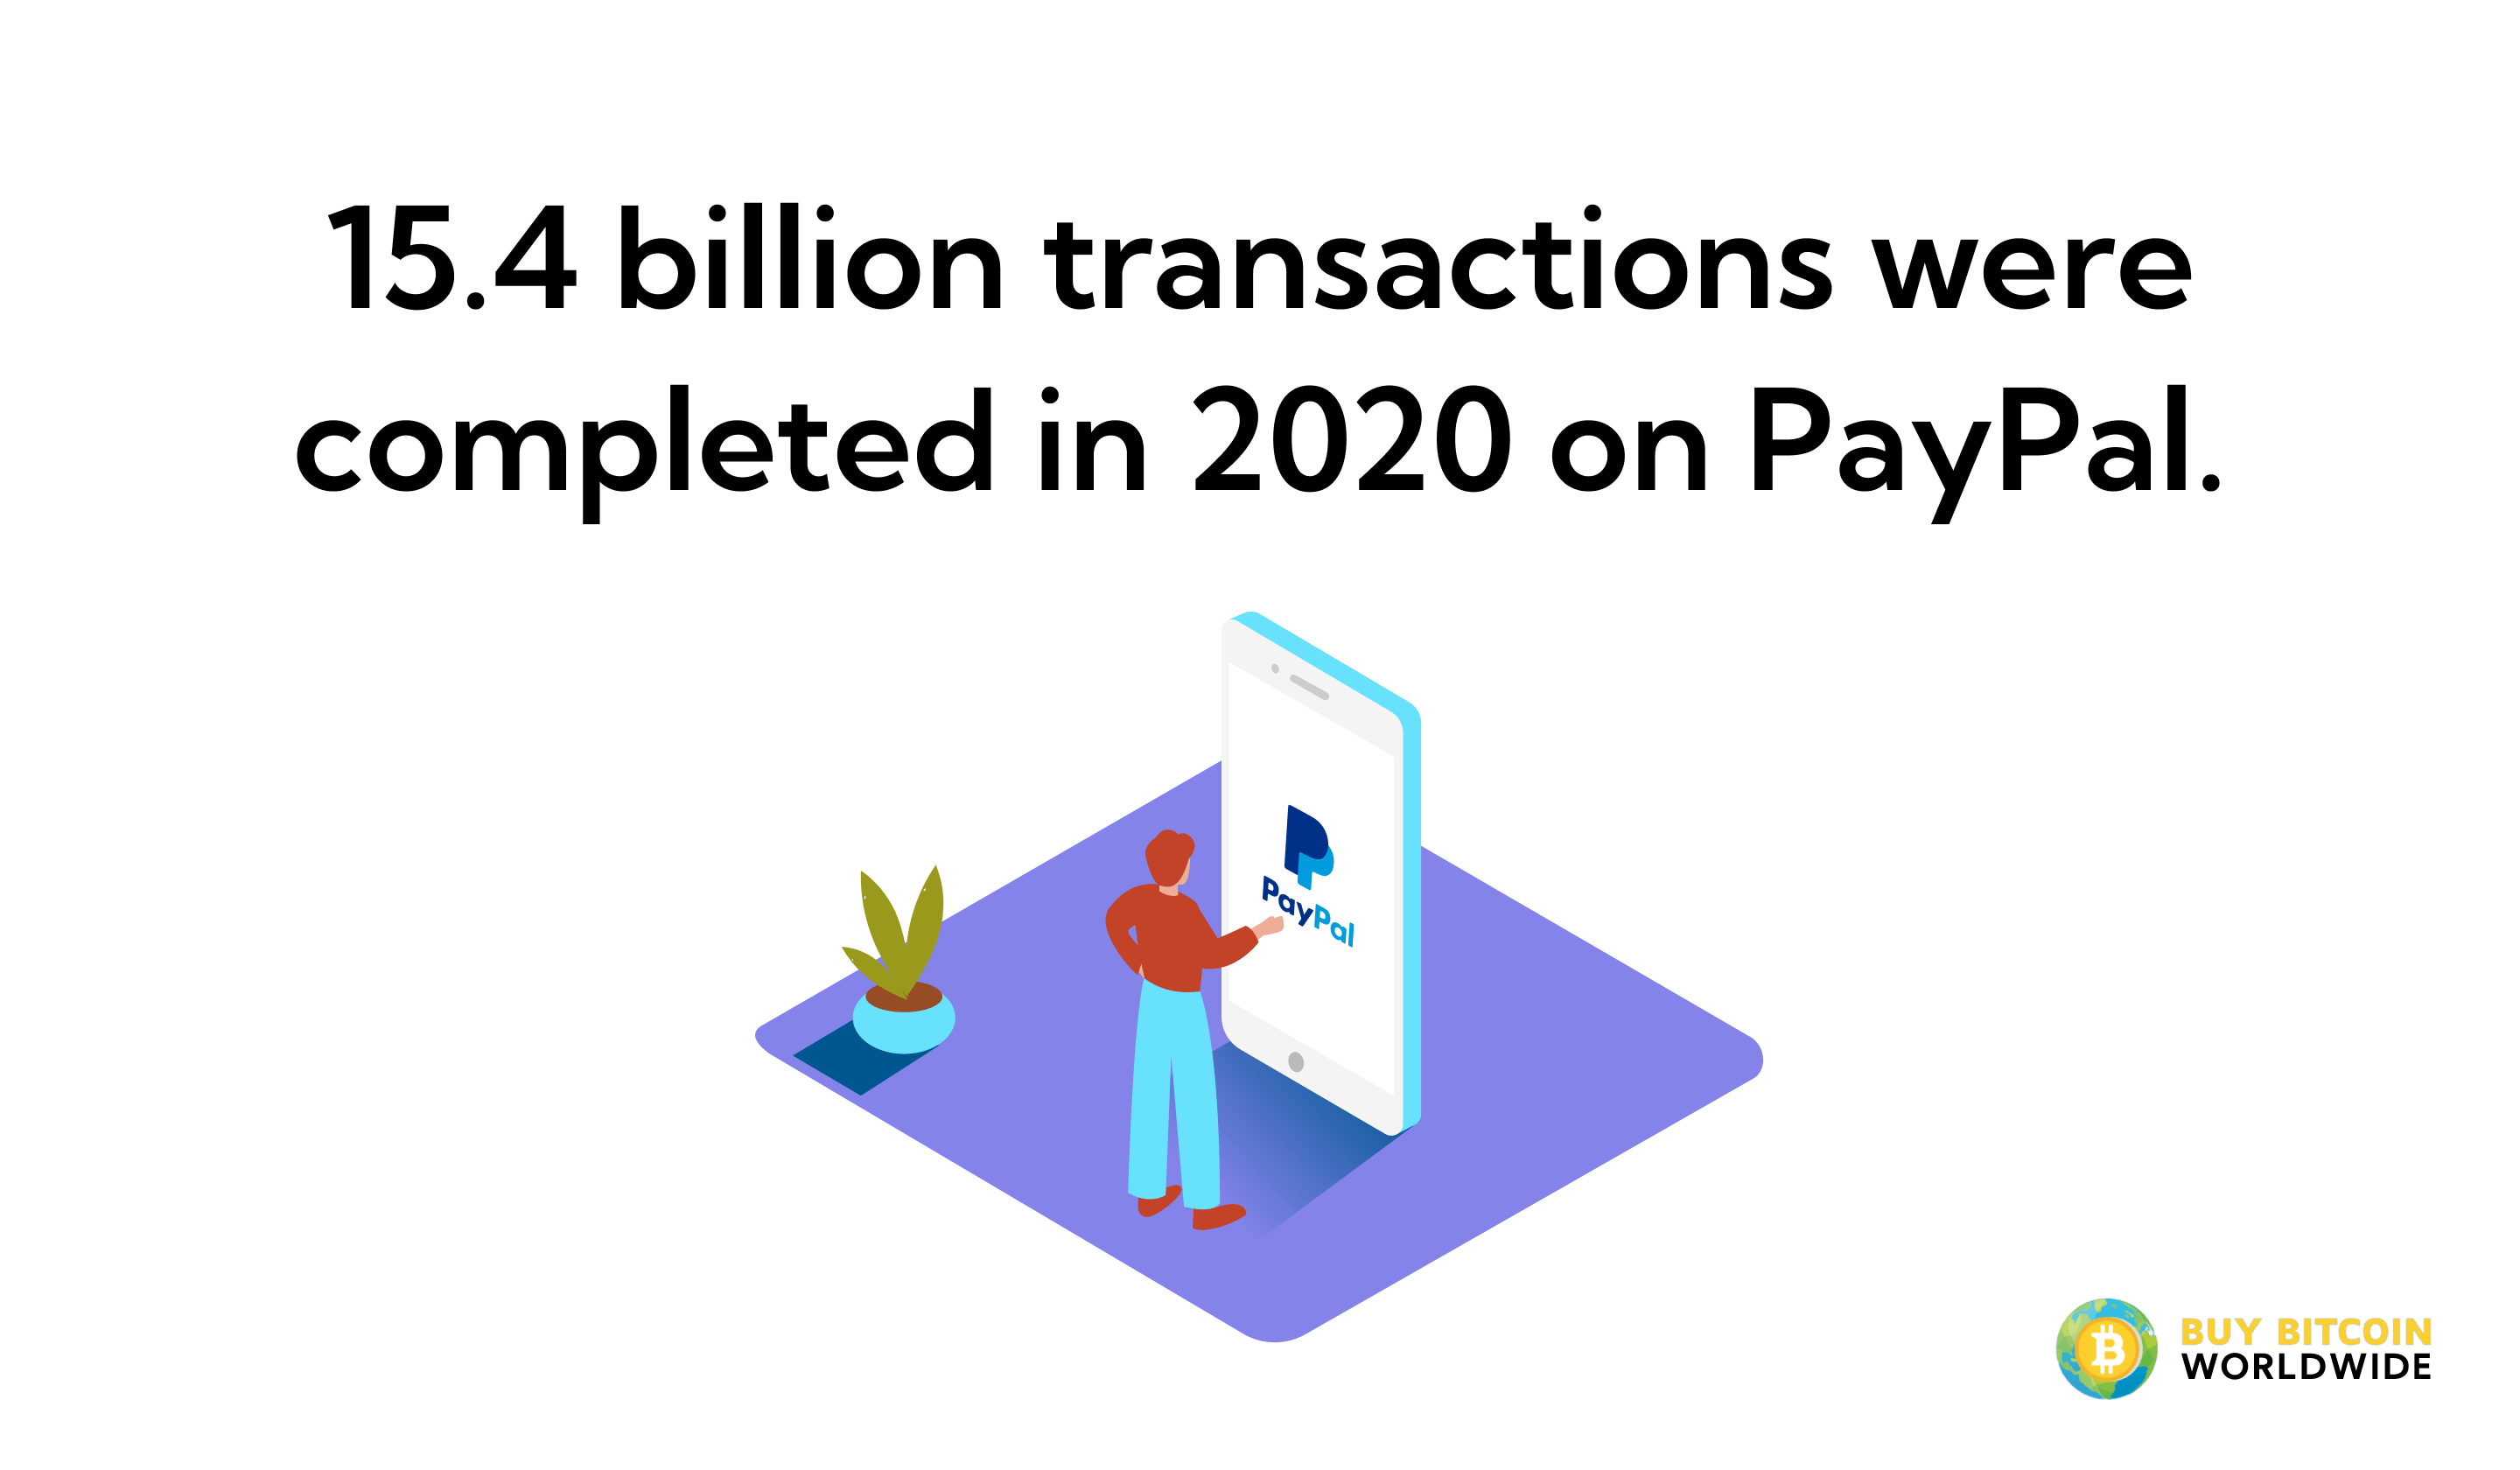 paypal transactions completed in 2020